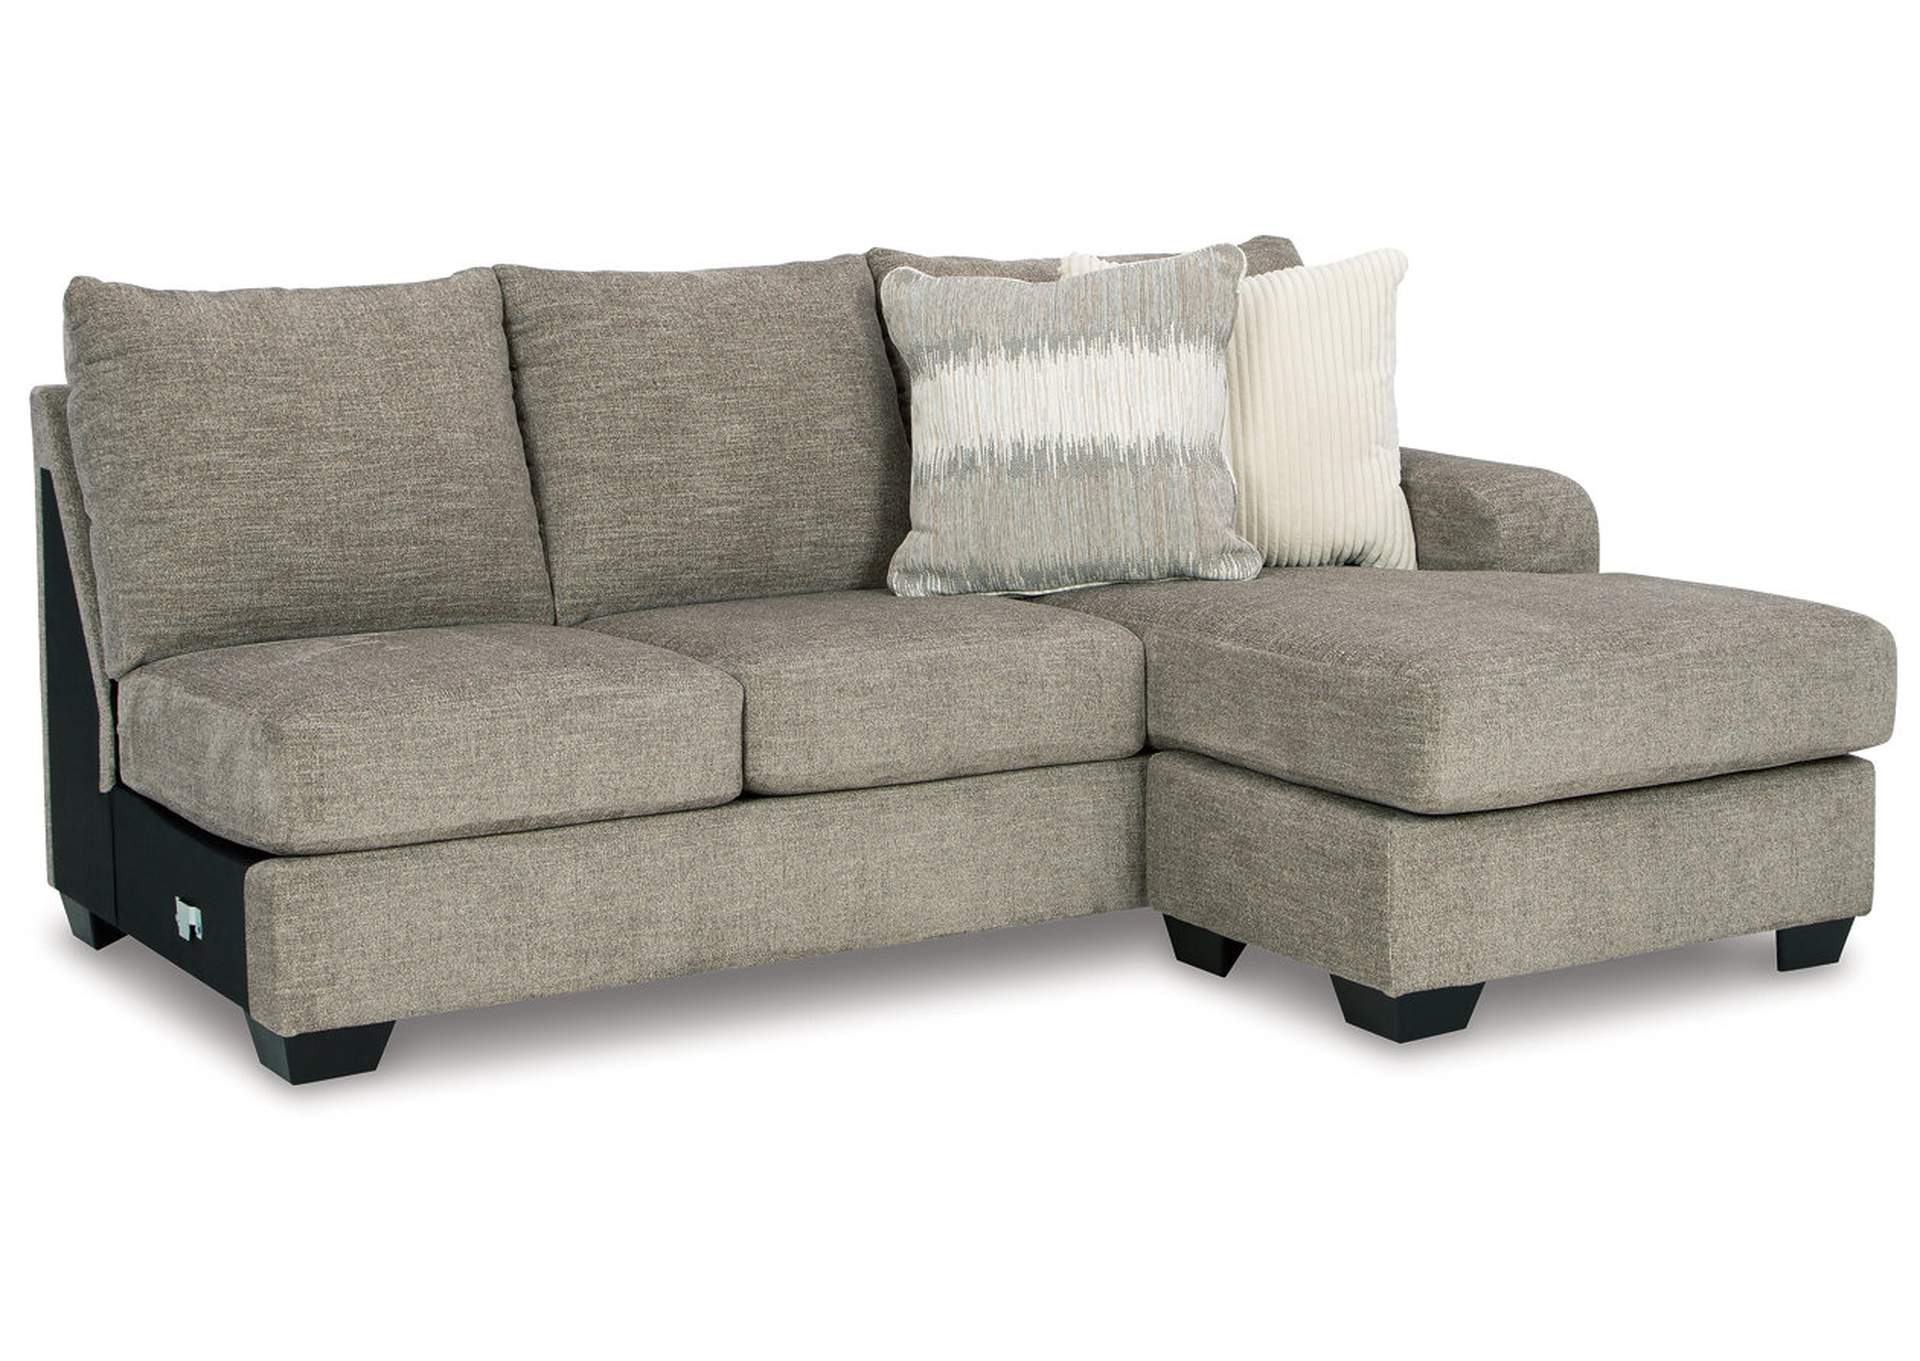 Creswell Right-Arm Facing Sofa Chaise,Signature Design By Ashley